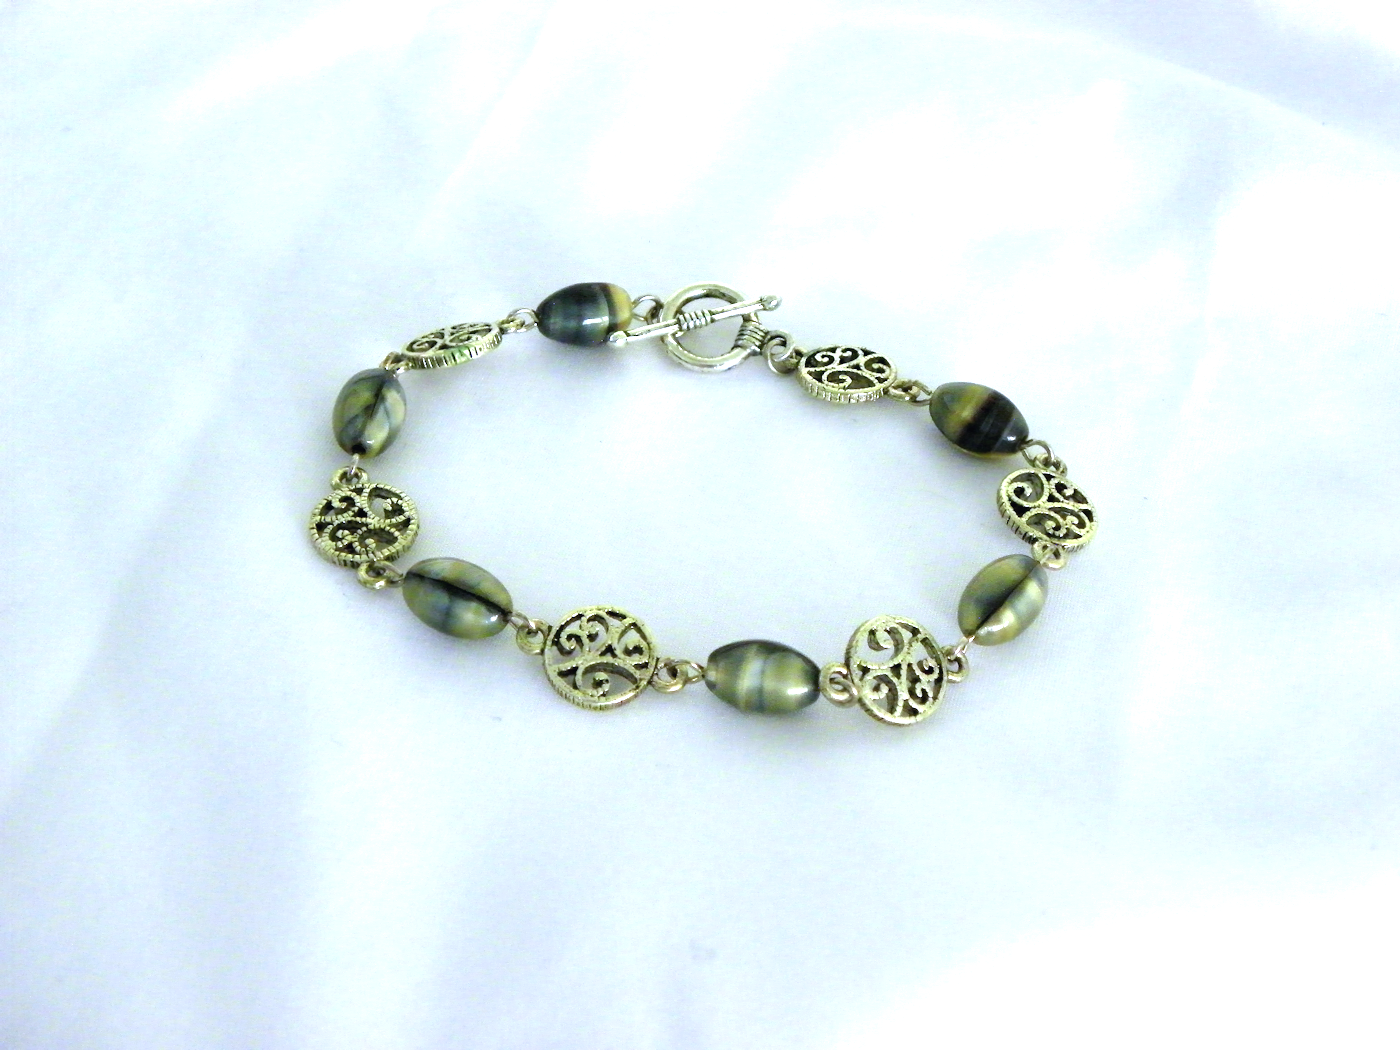 Faux Mother of Pearl Glass Bead Bracelet with Silver Metal Vine Bead Spacers